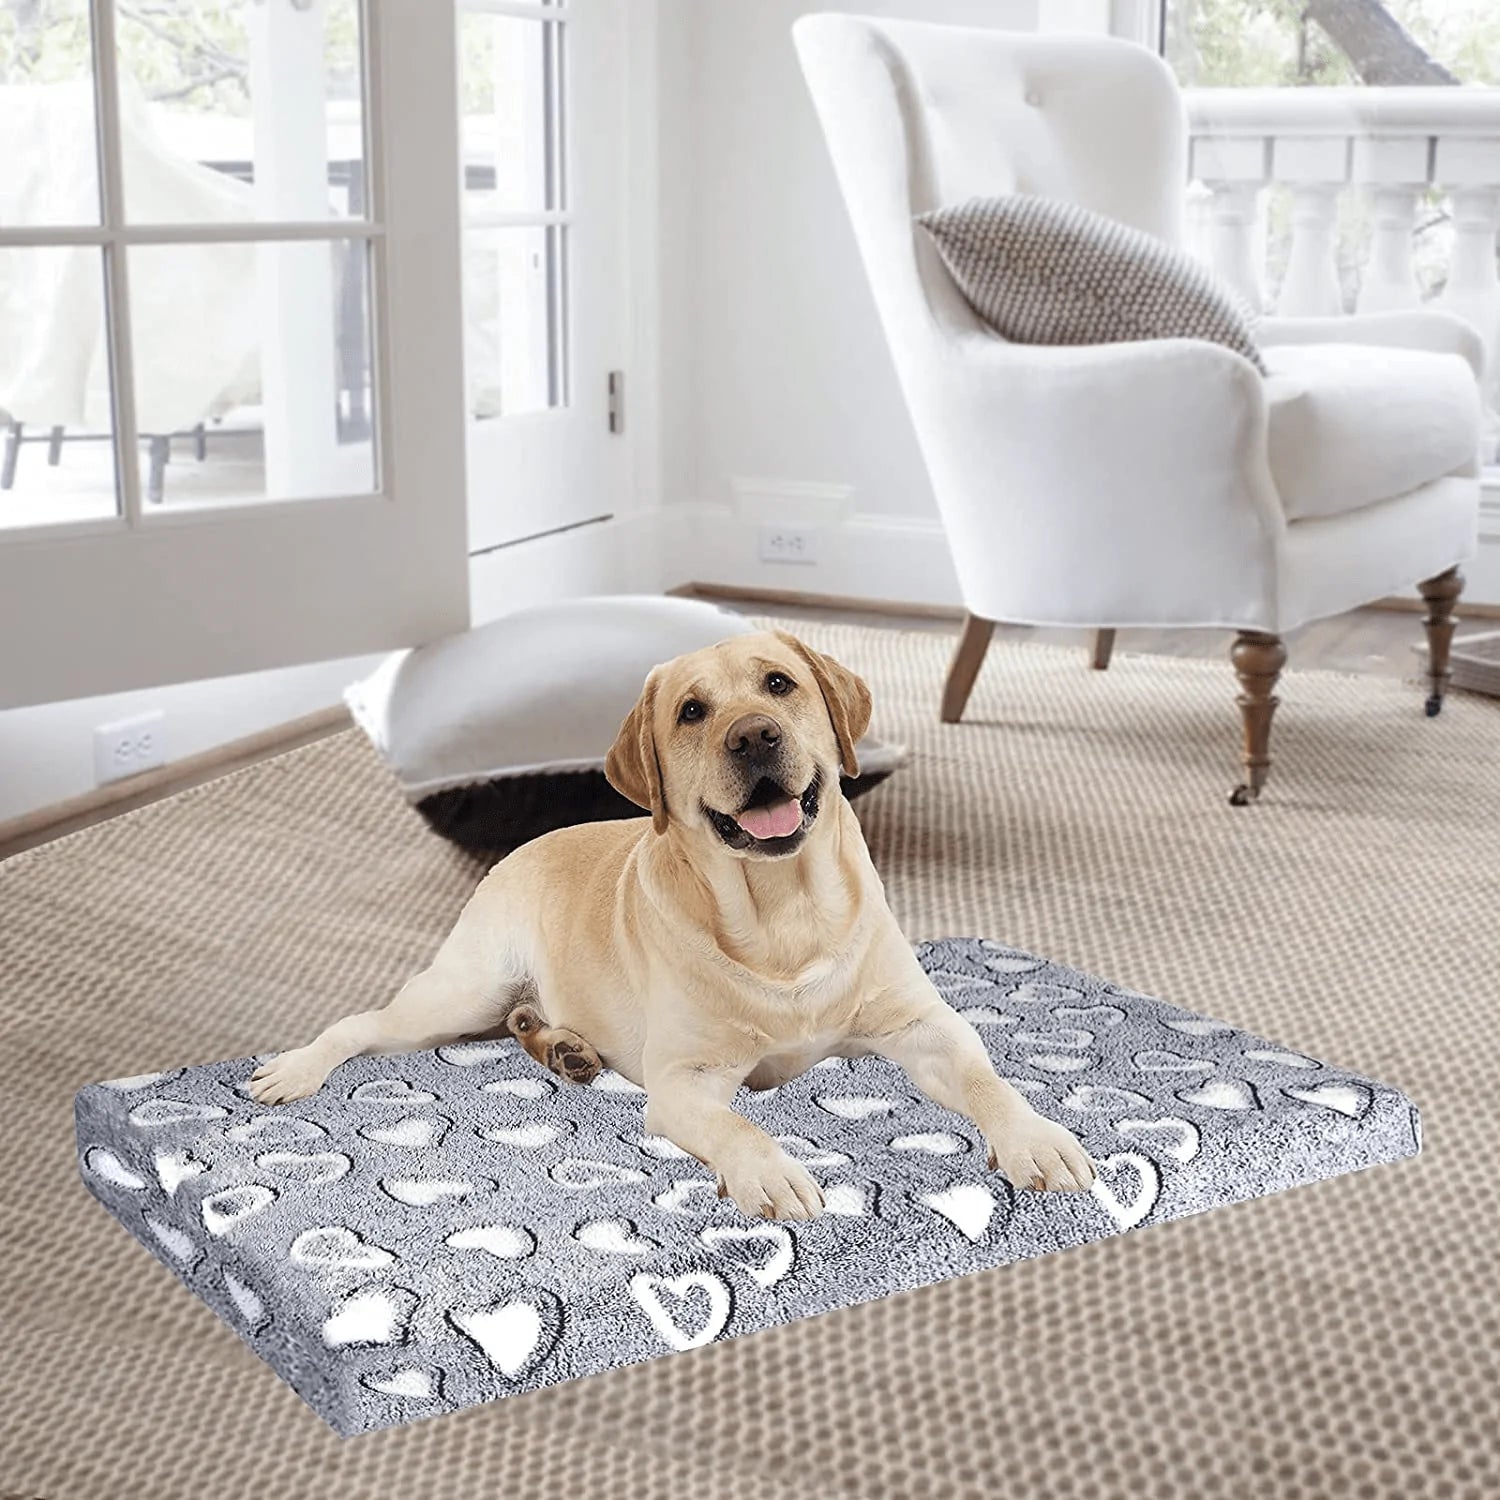 VANKEAN Dog Crate Mat Reversible(Warm and Cool), Stylish Pet Bed Mattress for Dogs, Water Proof Linings, Removable Machine Washable Cover, Firm Support Pet Pad for Small to Xx-Large Dogs, Grey Animals & Pet Supplies > Pet Supplies > Dog Supplies > Dog Beds VANKEAN   